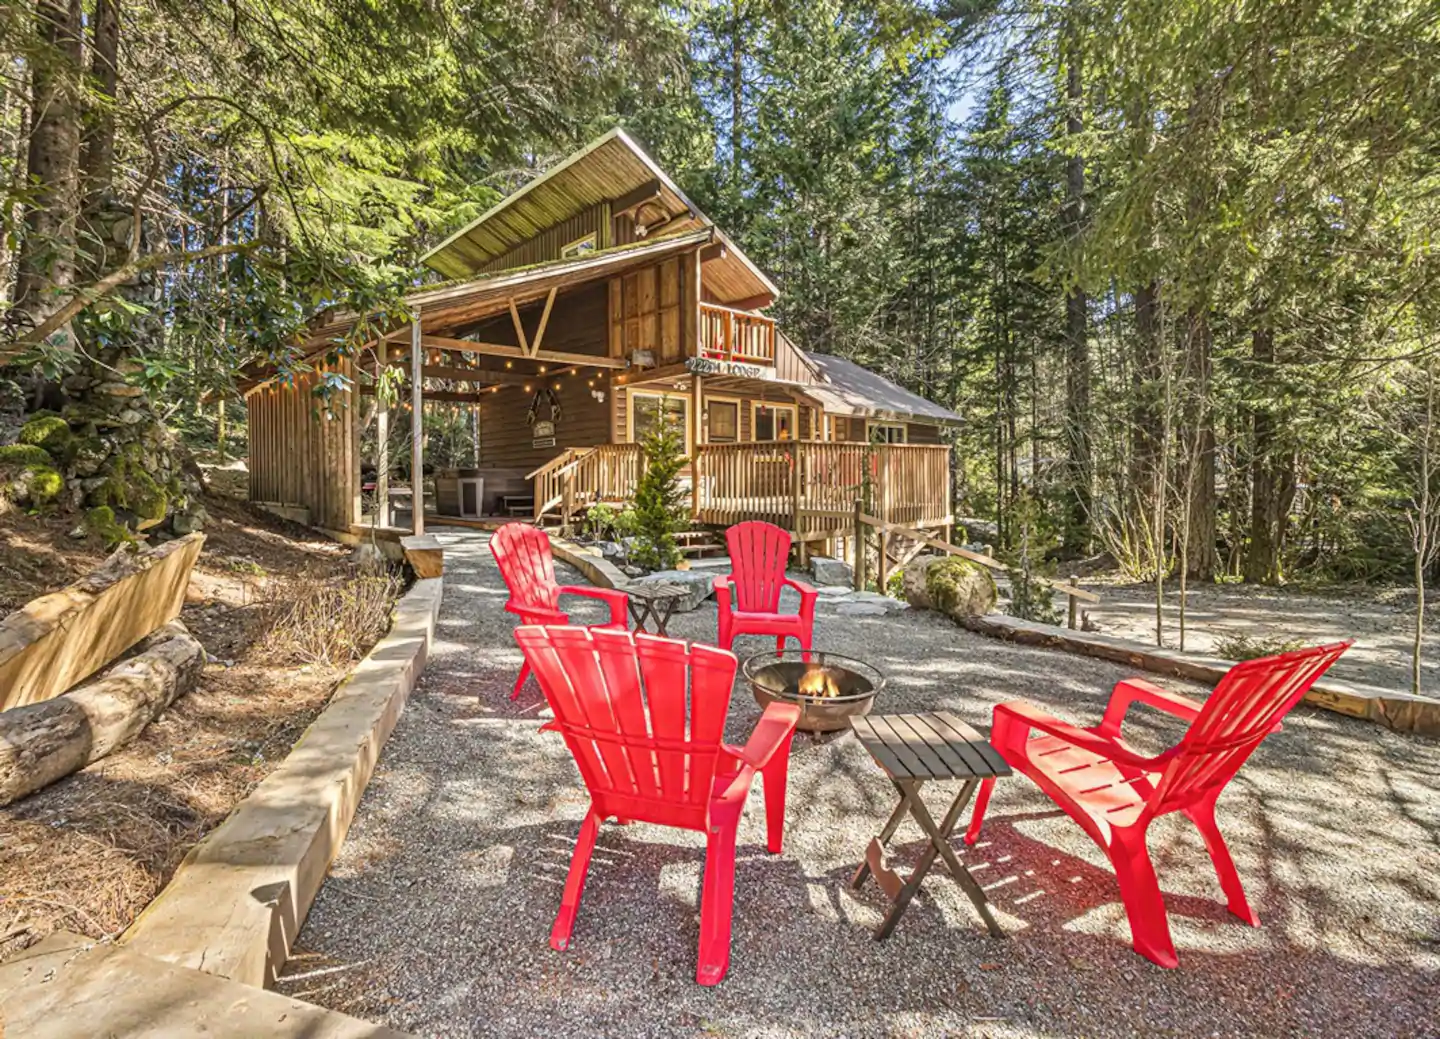 Totem Lodge with a fire pit. A great Pacific Northwest cabin.